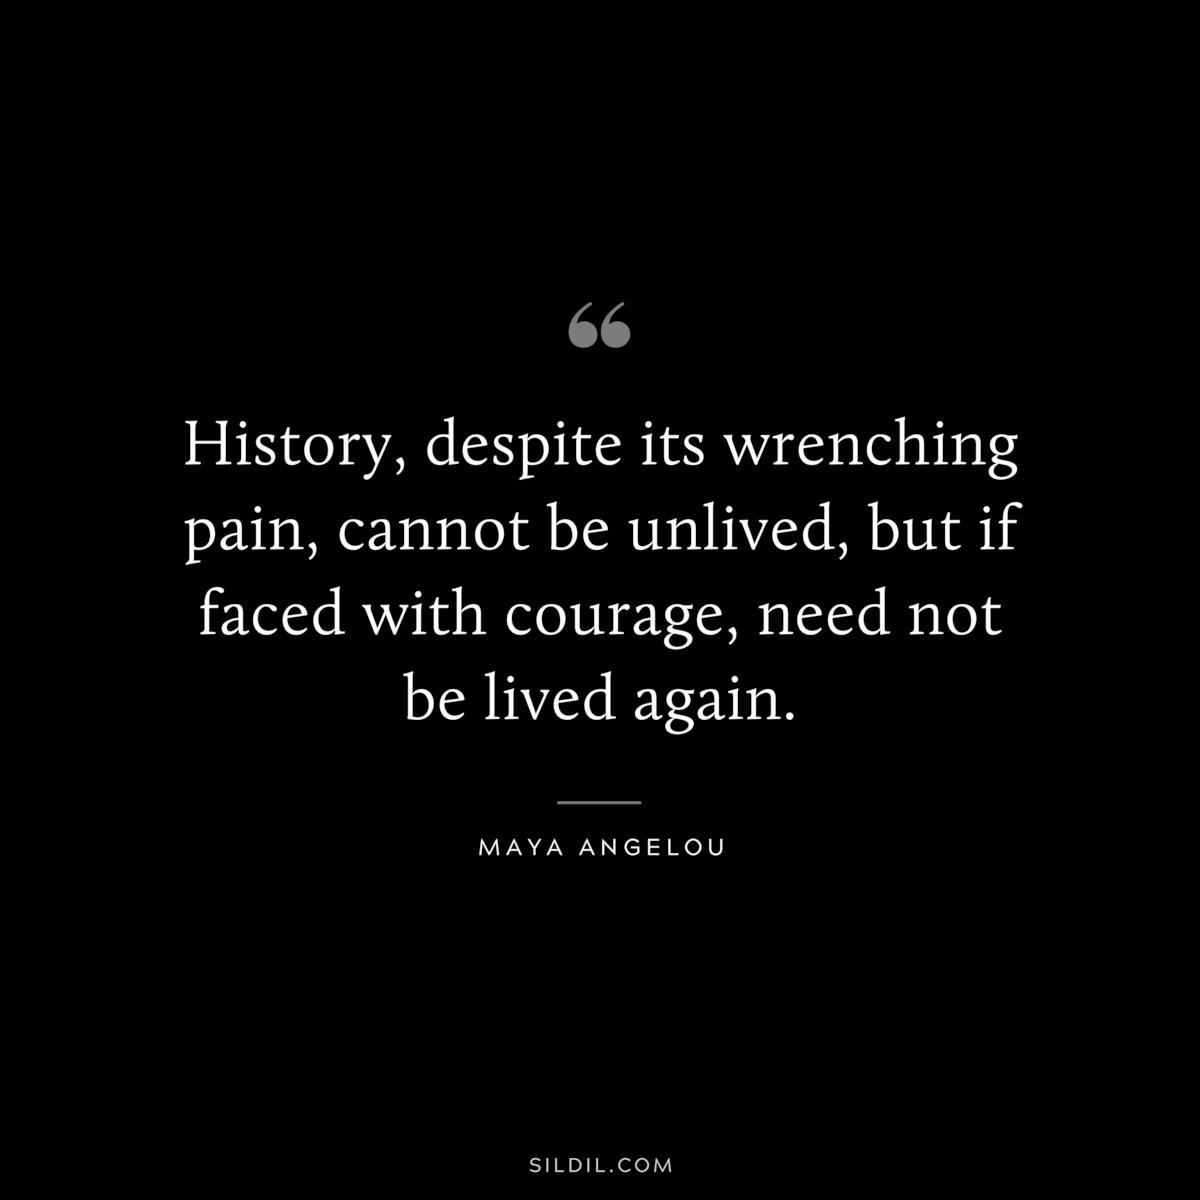 History, despite its wrenching pain, cannot be unlived, but if faced with courage, need not be lived again. ― Maya Angelou